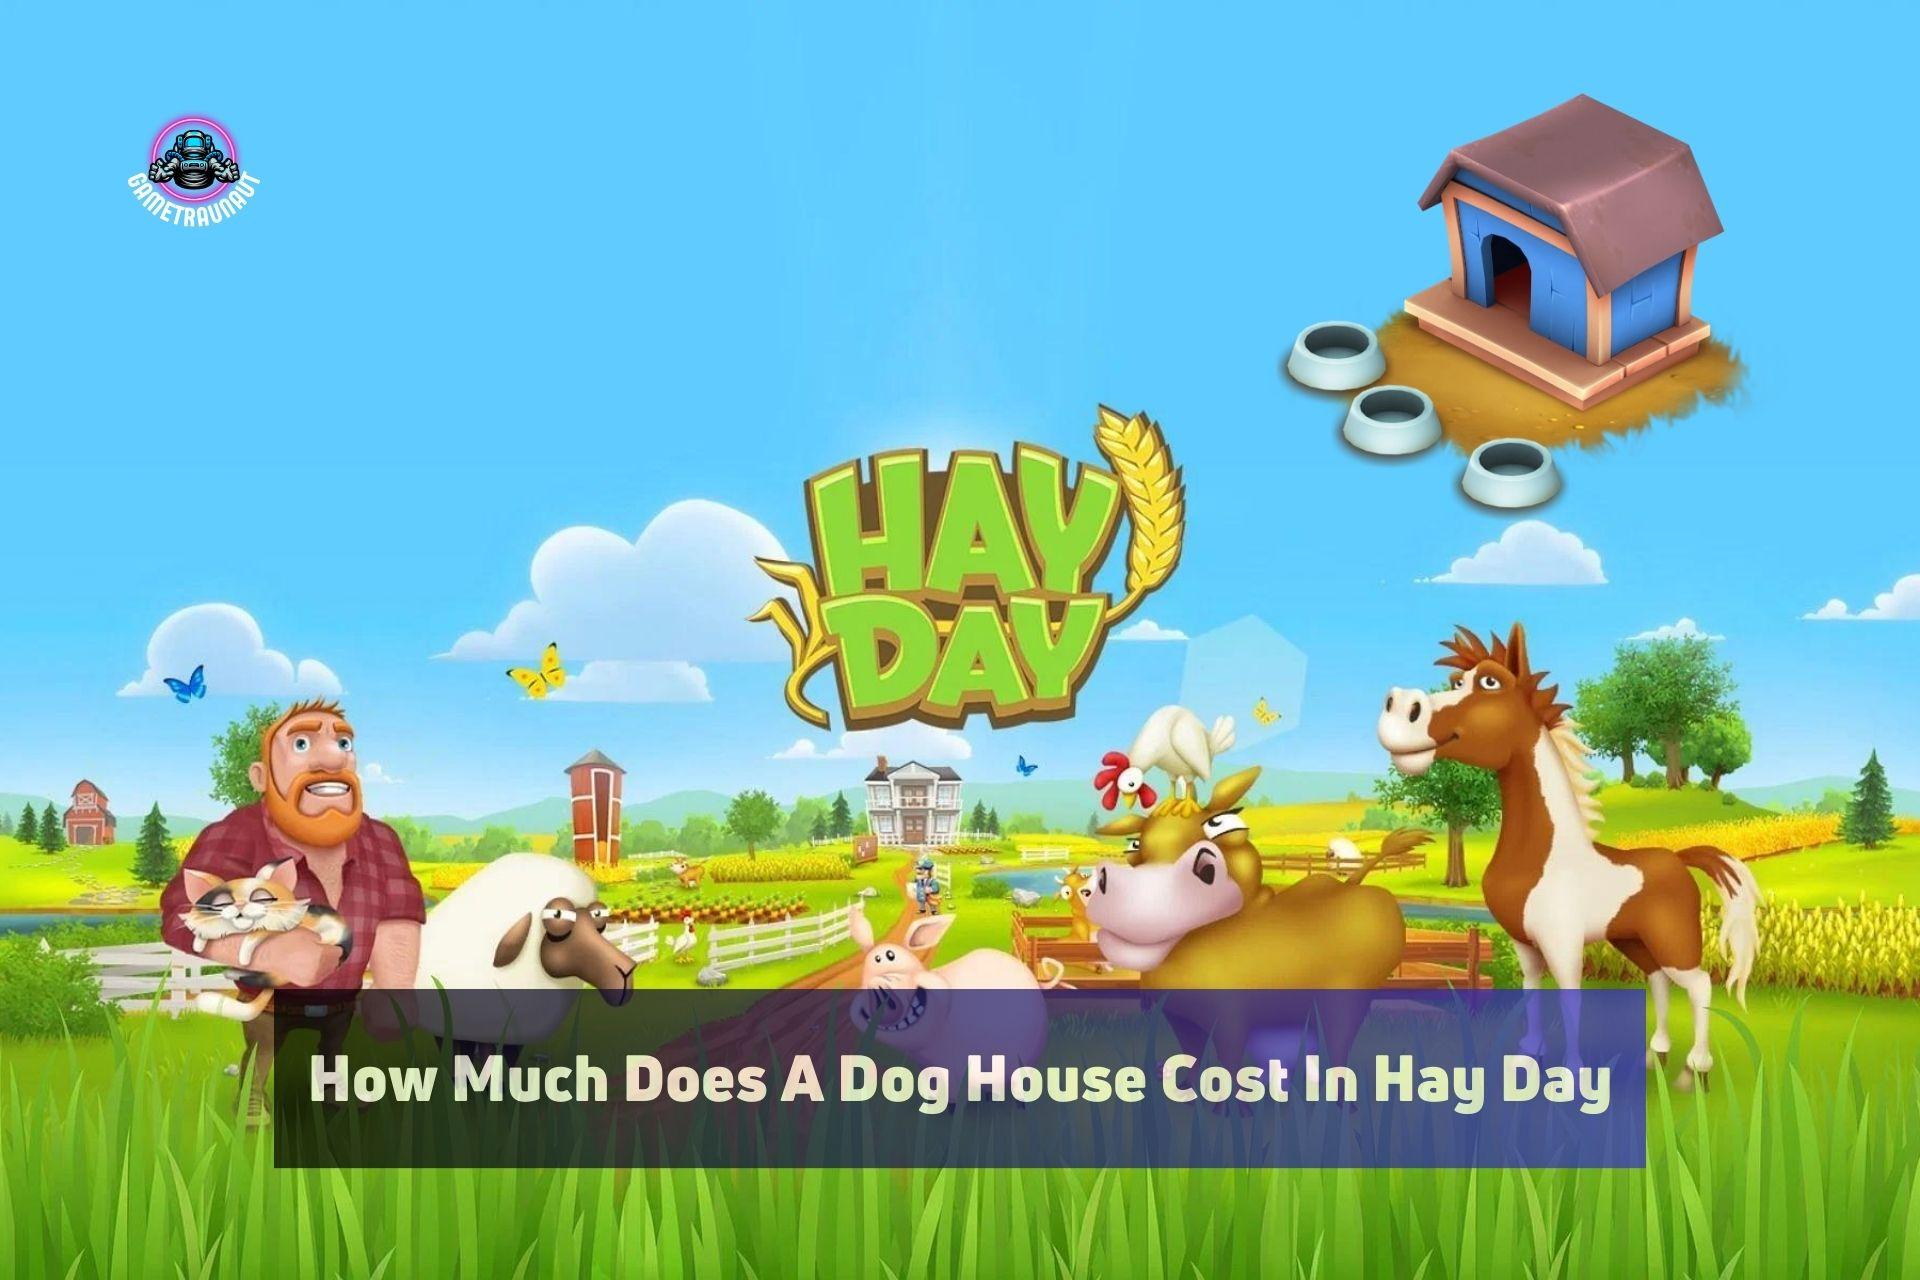 How much does a dog house cost in hay day